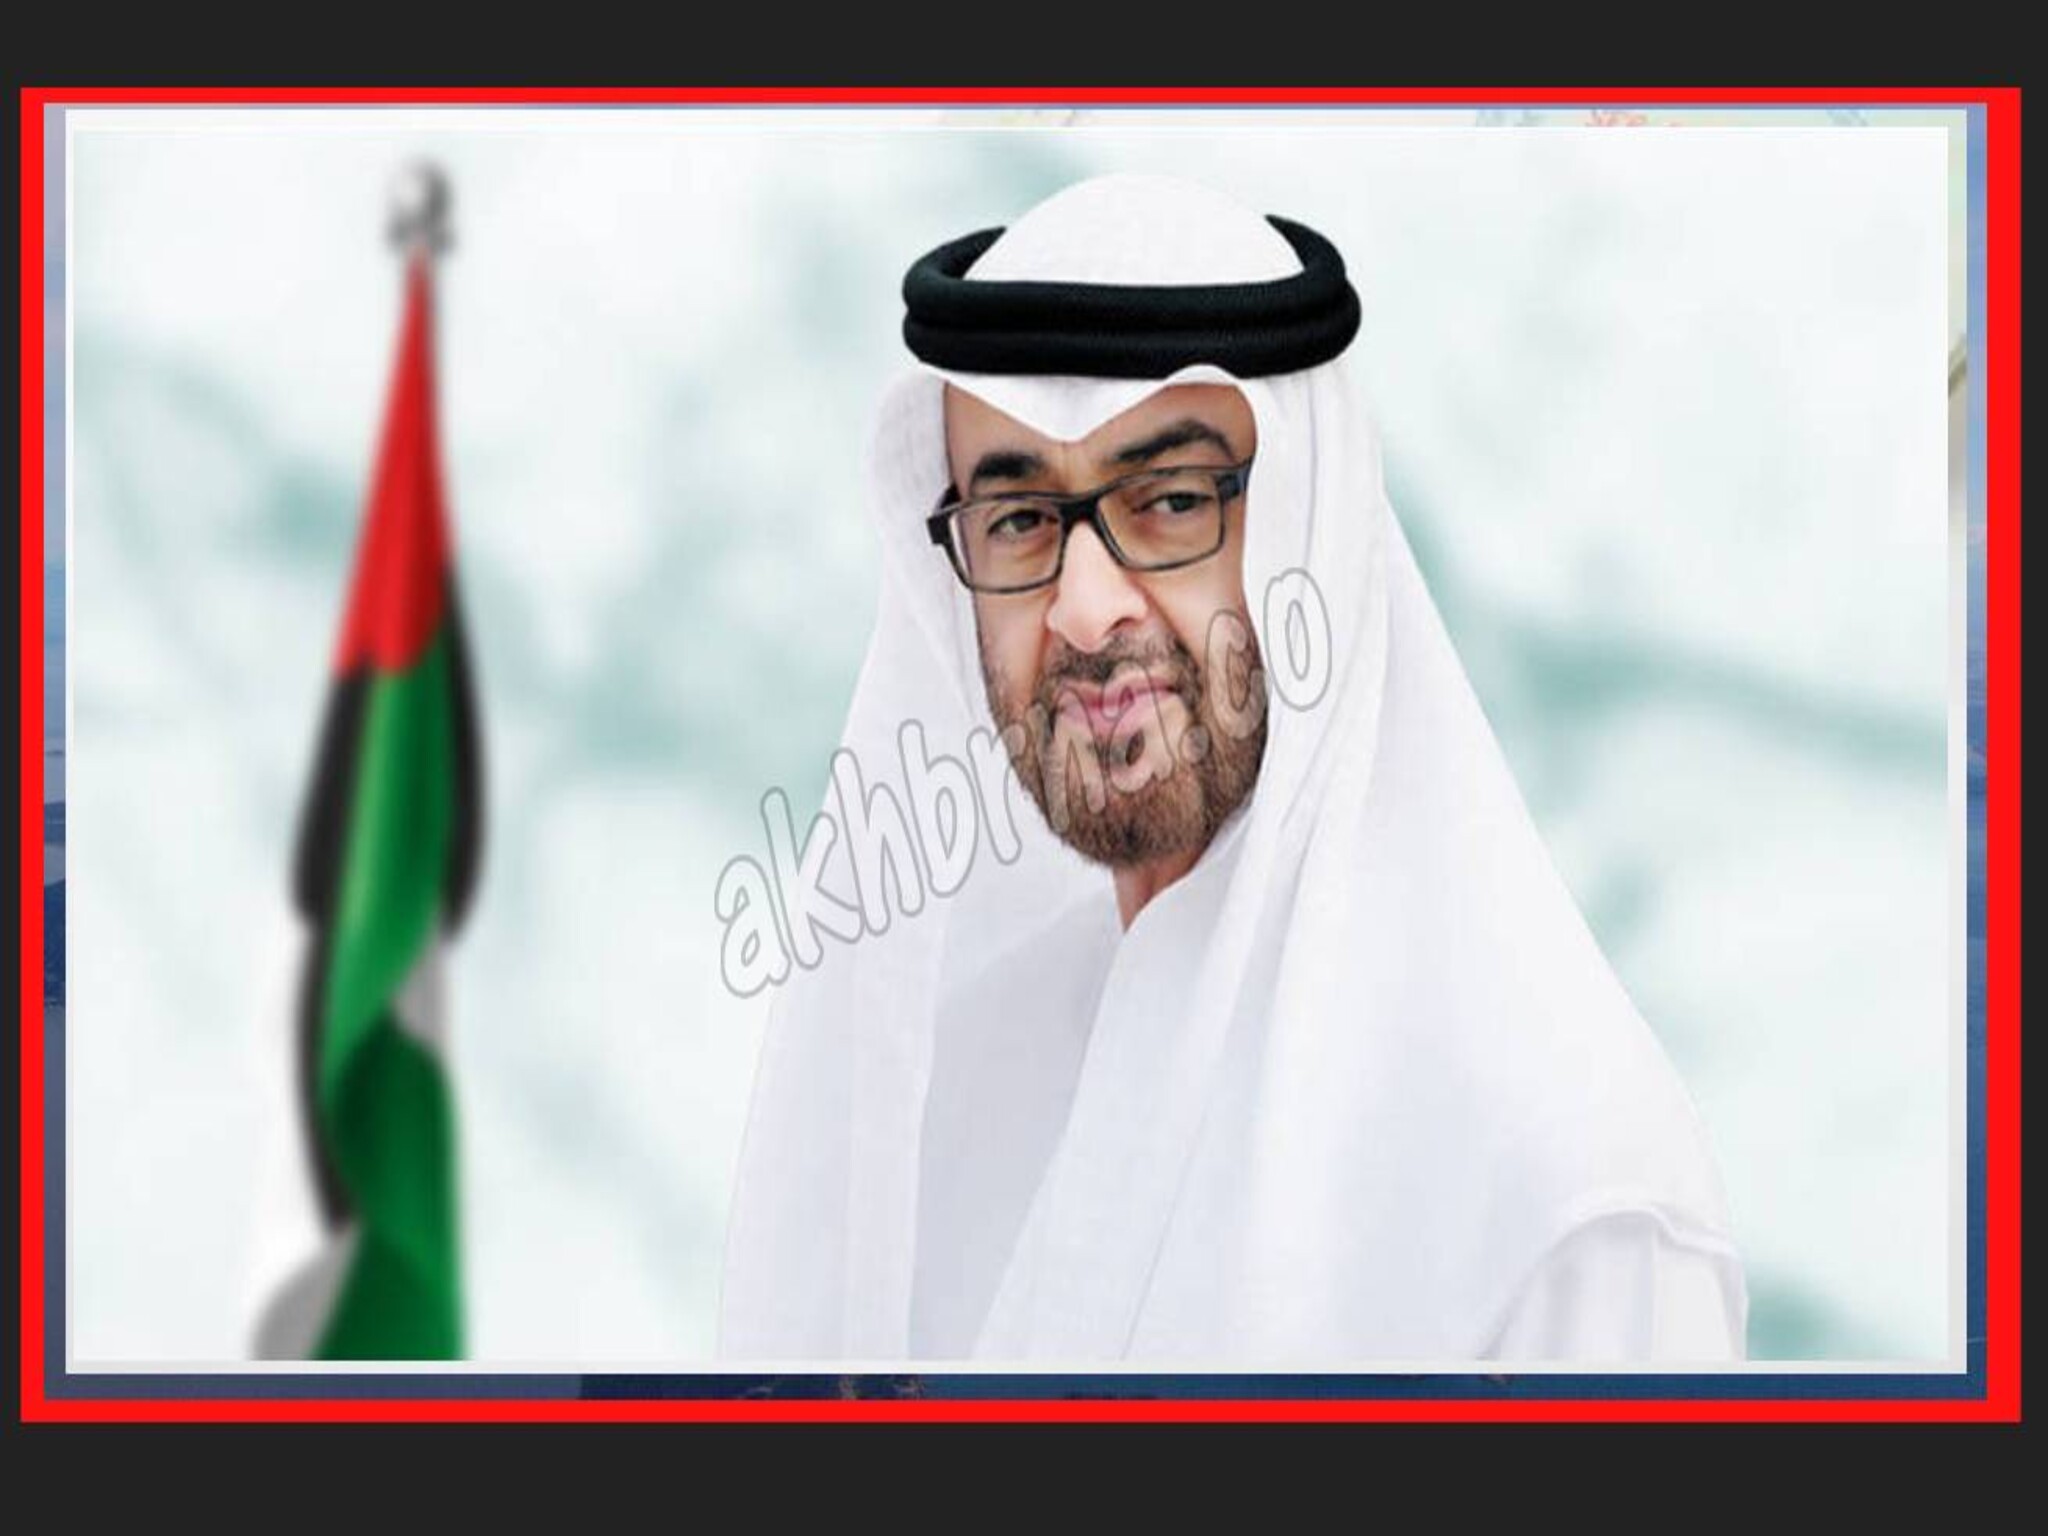 Good news: President of UAE orders the payment of all debts and identifies the beneficiaries